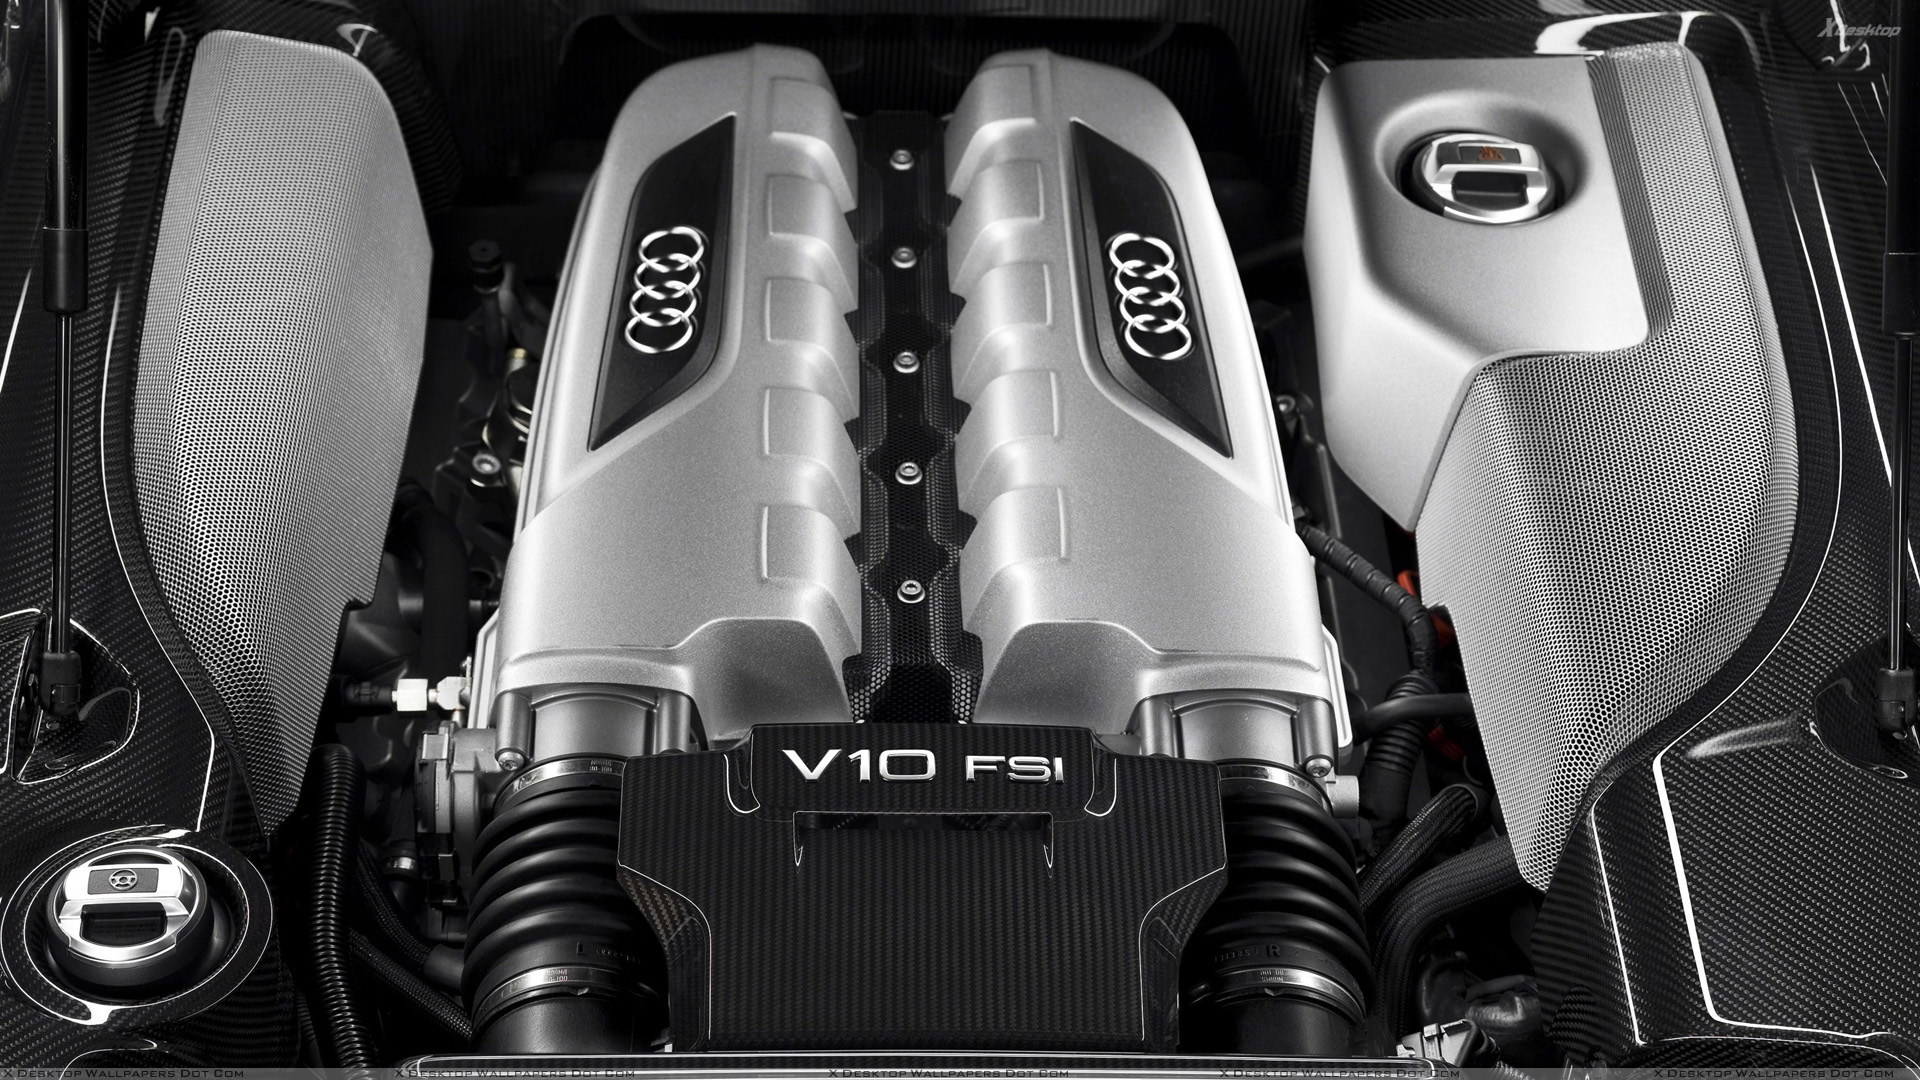 Car Engines Wallpaper Photos Image In HD